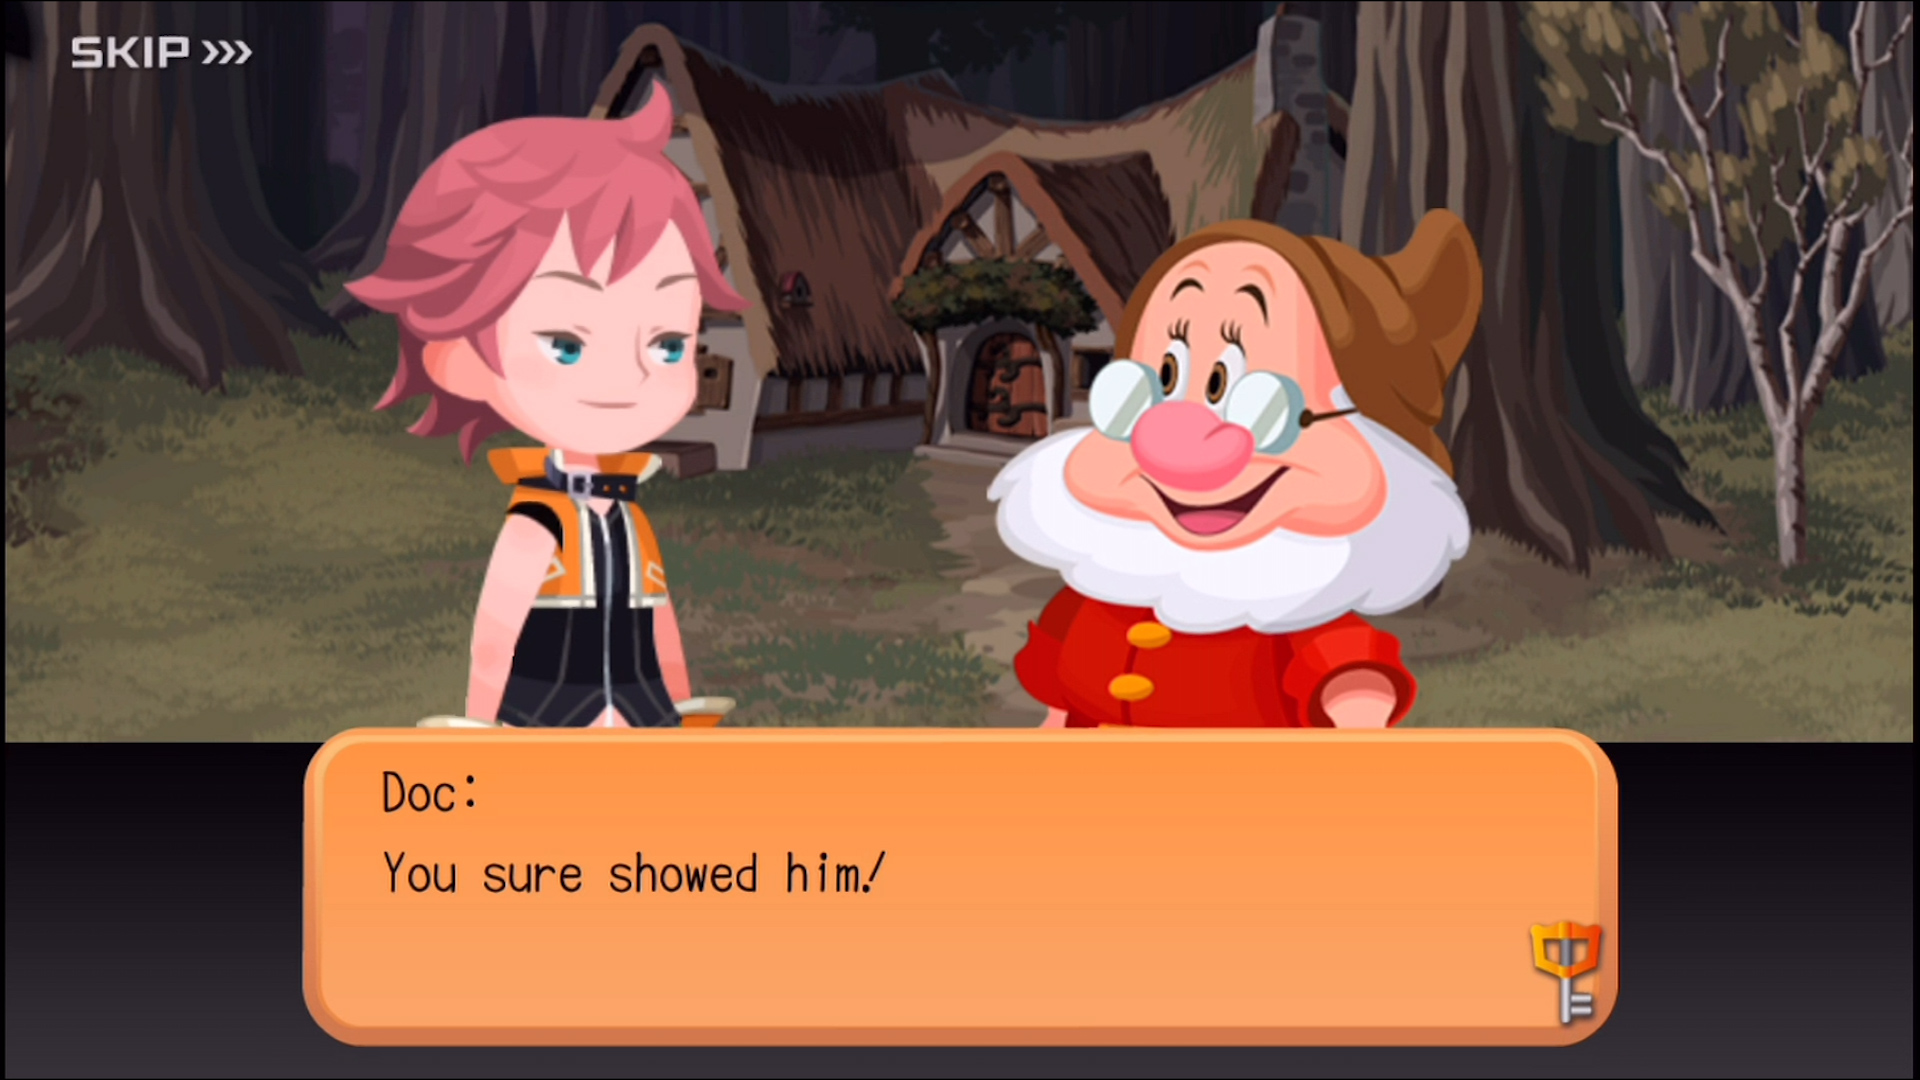 Unchained χ Is A Pleasant Little Slice Of Kingdom Hearts